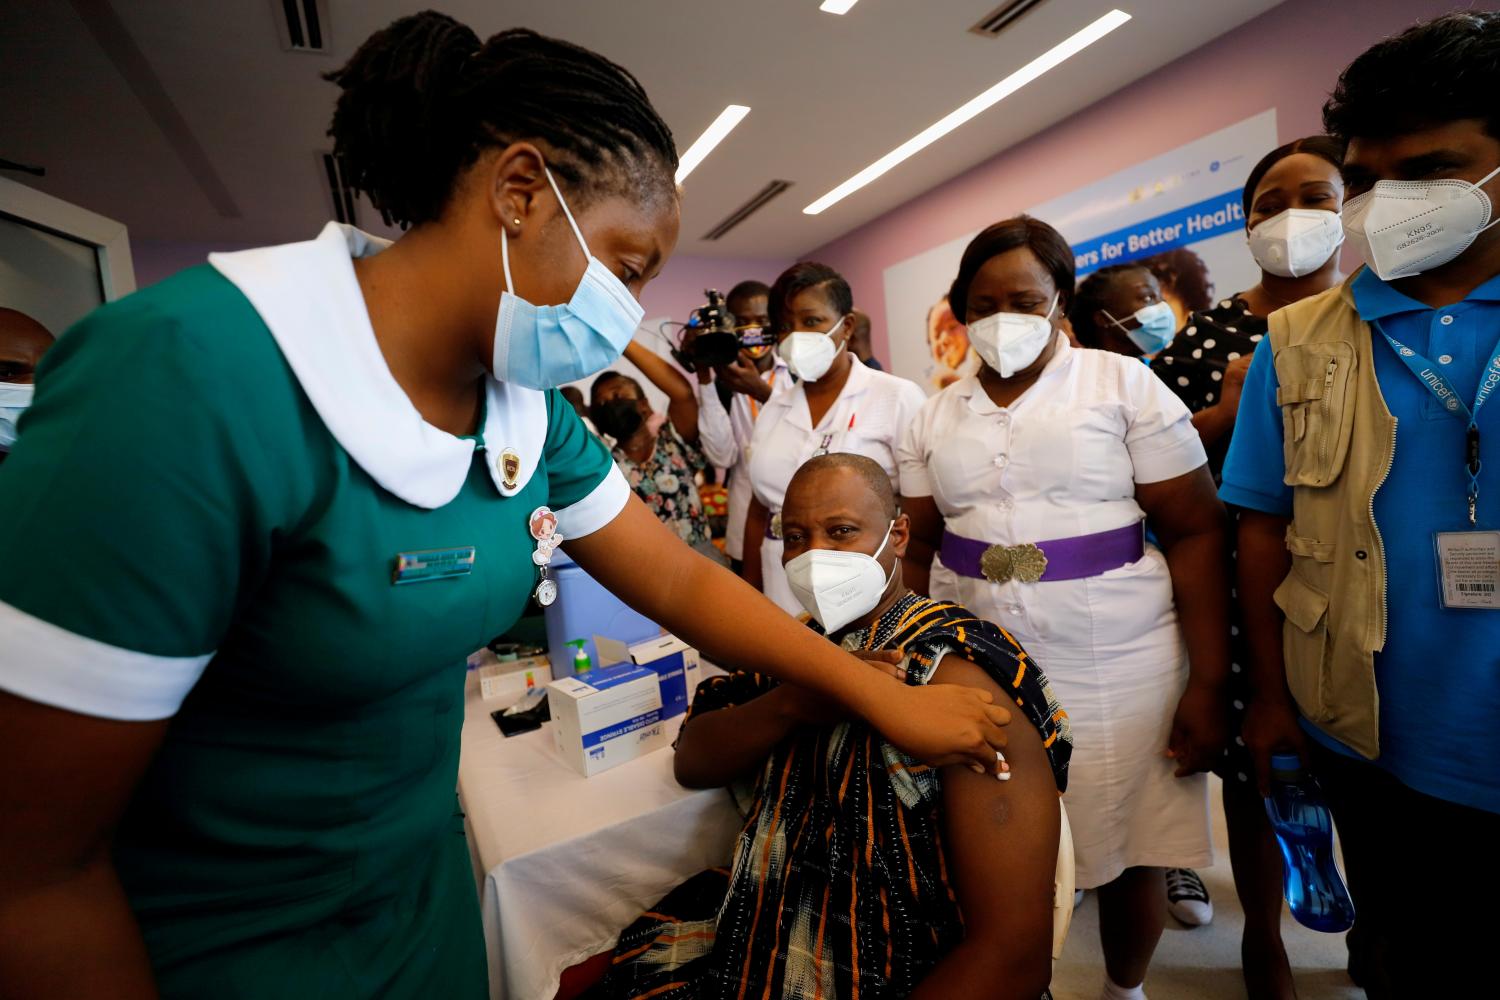 FILE PHOTO: Director General of the Ghana Health Service Dr. Patrick Kuma-Aboagye receives the coronavirus disease (COVID-19) vaccine during the vaccination campaign at the Ridge Hospital in Accra, Ghana March 2, 2021. REUTERS/Francis Kokoroko/File Photo